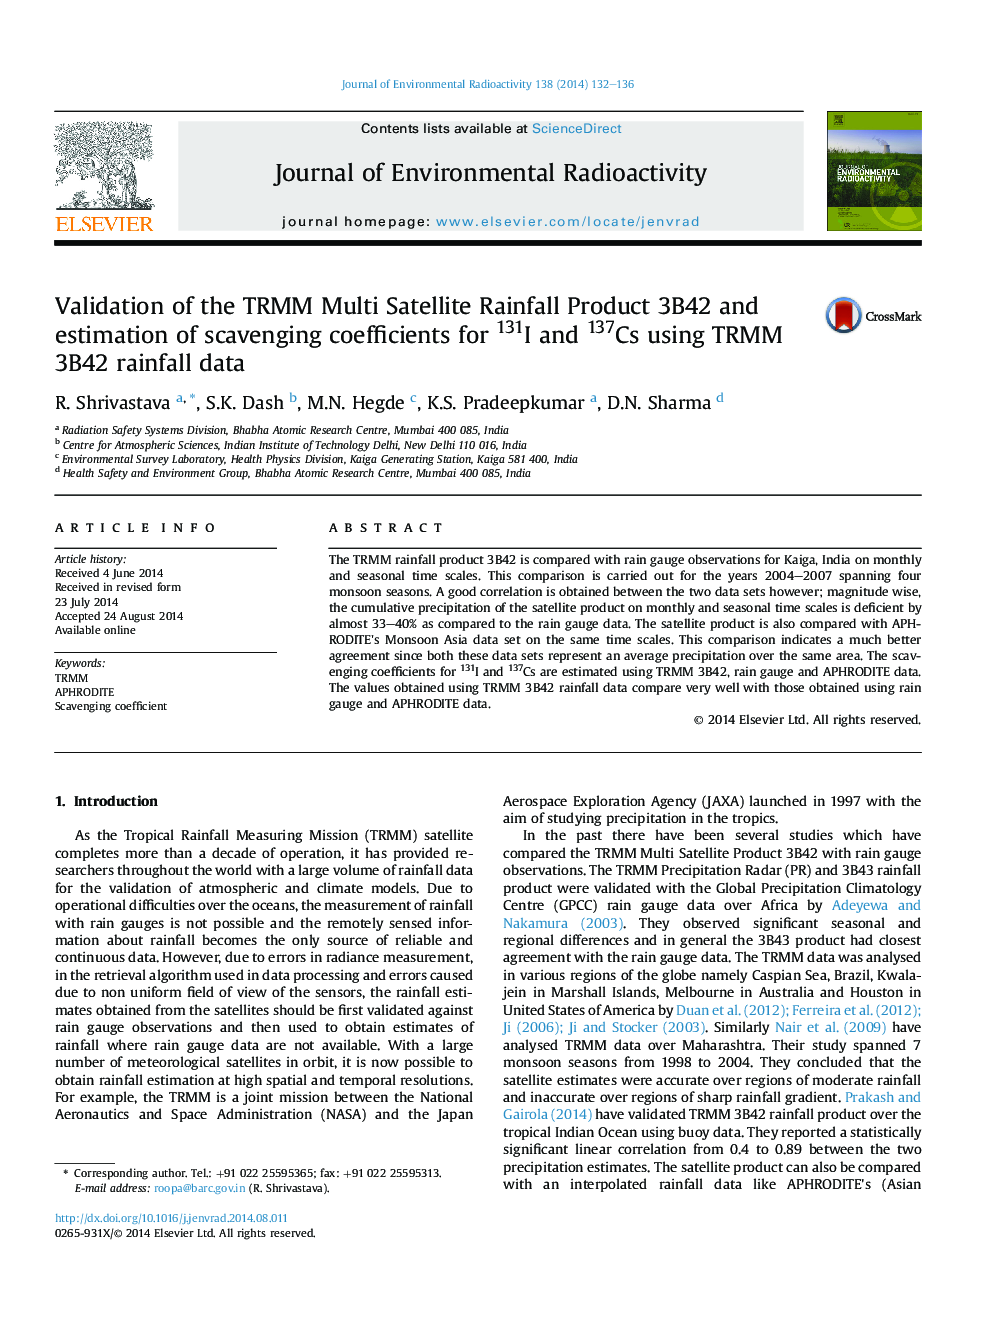 Validation of the TRMM Multi Satellite Rainfall Product 3B42 and estimation of scavenging coefficients for 131I and 137Cs using TRMM 3B42 rainfall data